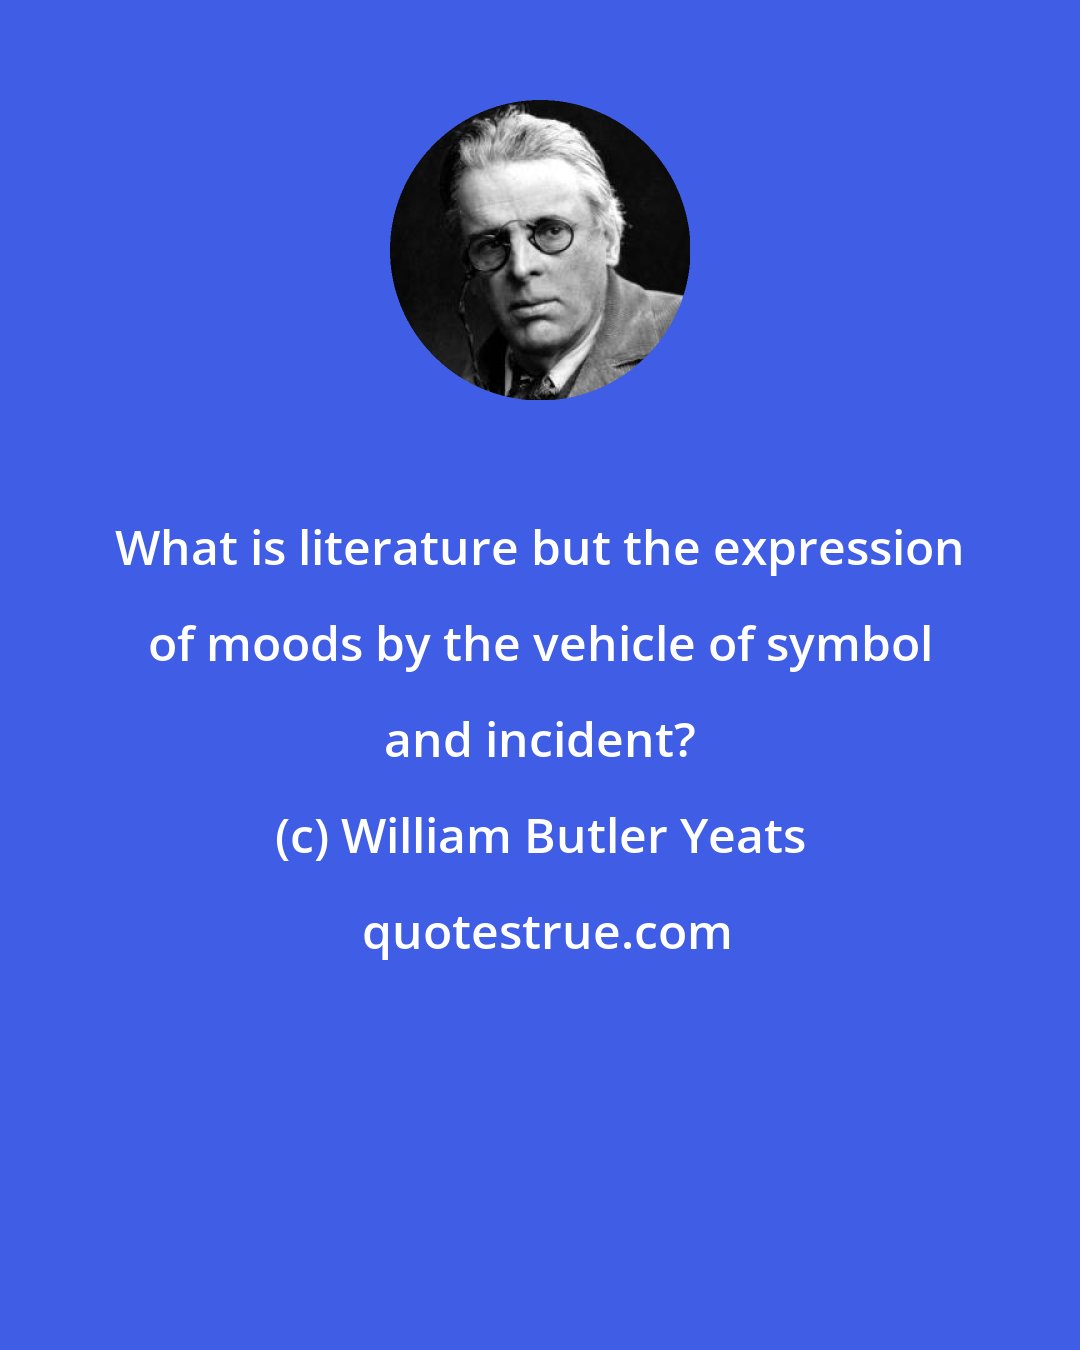 William Butler Yeats: What is literature but the expression of moods by the vehicle of symbol and incident?